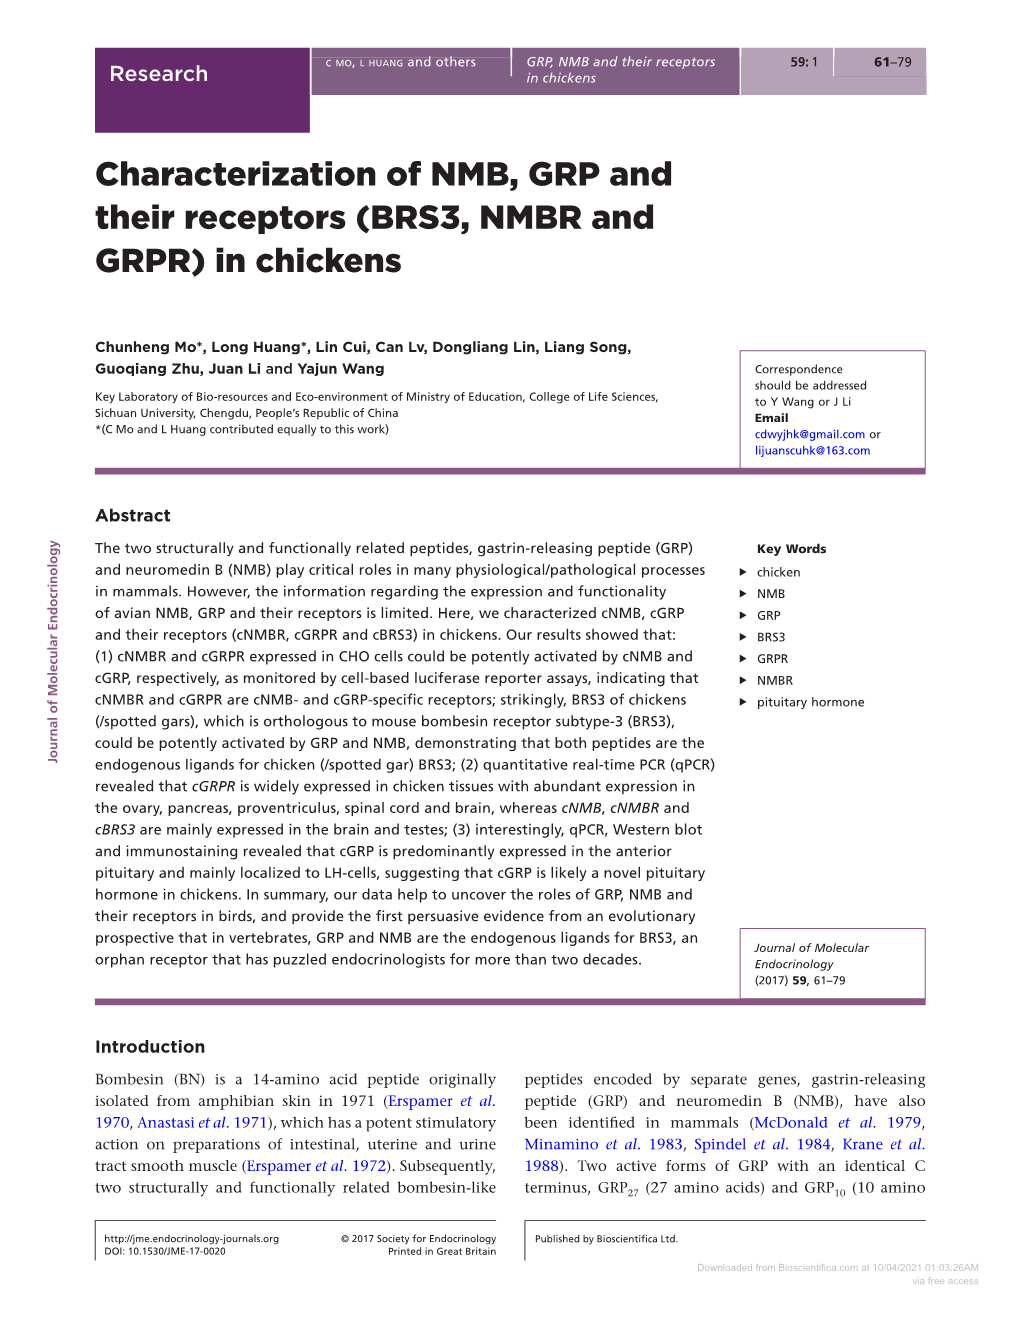 Characterization of NMB, GRP and Their Receptors (BRS3, NMBR and GRPR) in Chickens